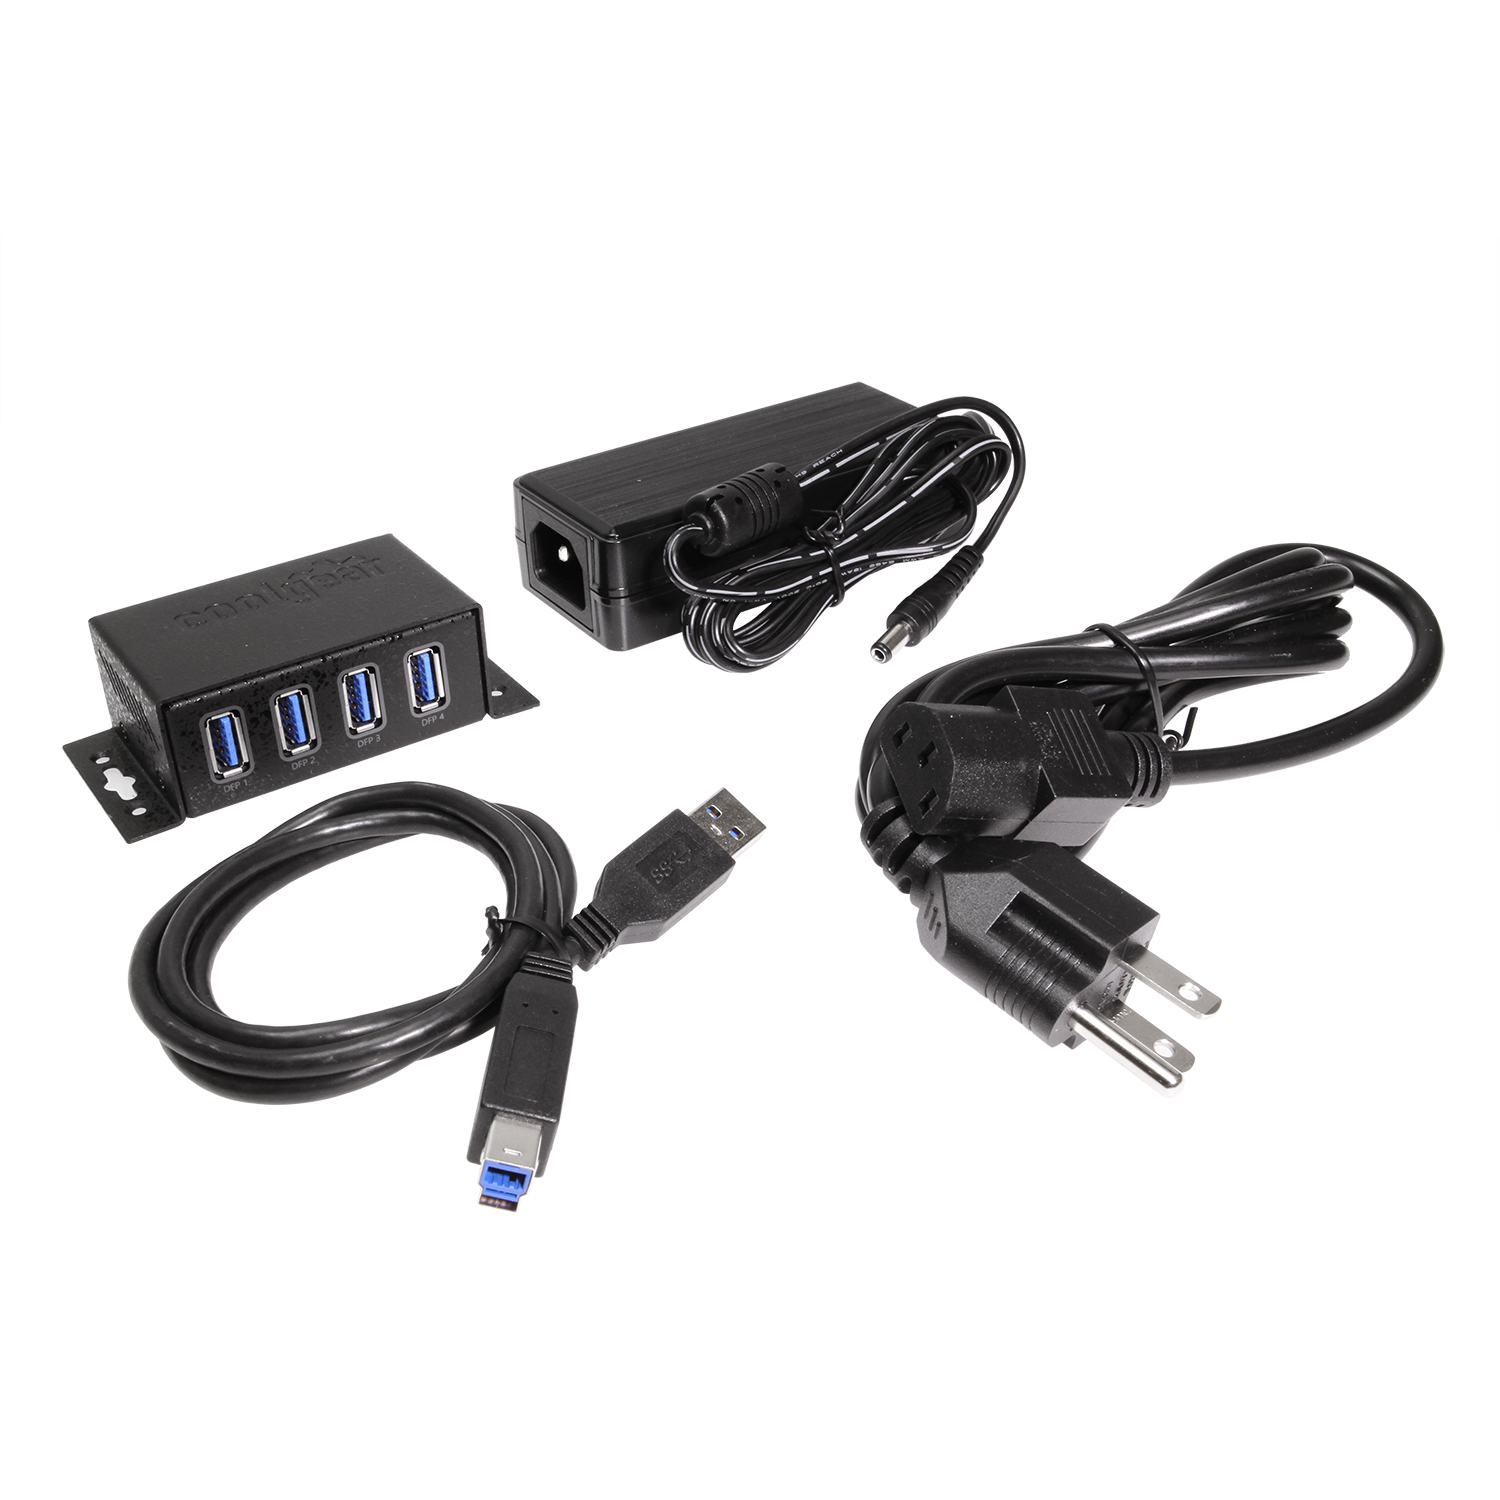 4 Port USB 3.2 Gen 1 Mini Powered Hub w/ ESD Surge Protection & Power  Adapter - Coolgear